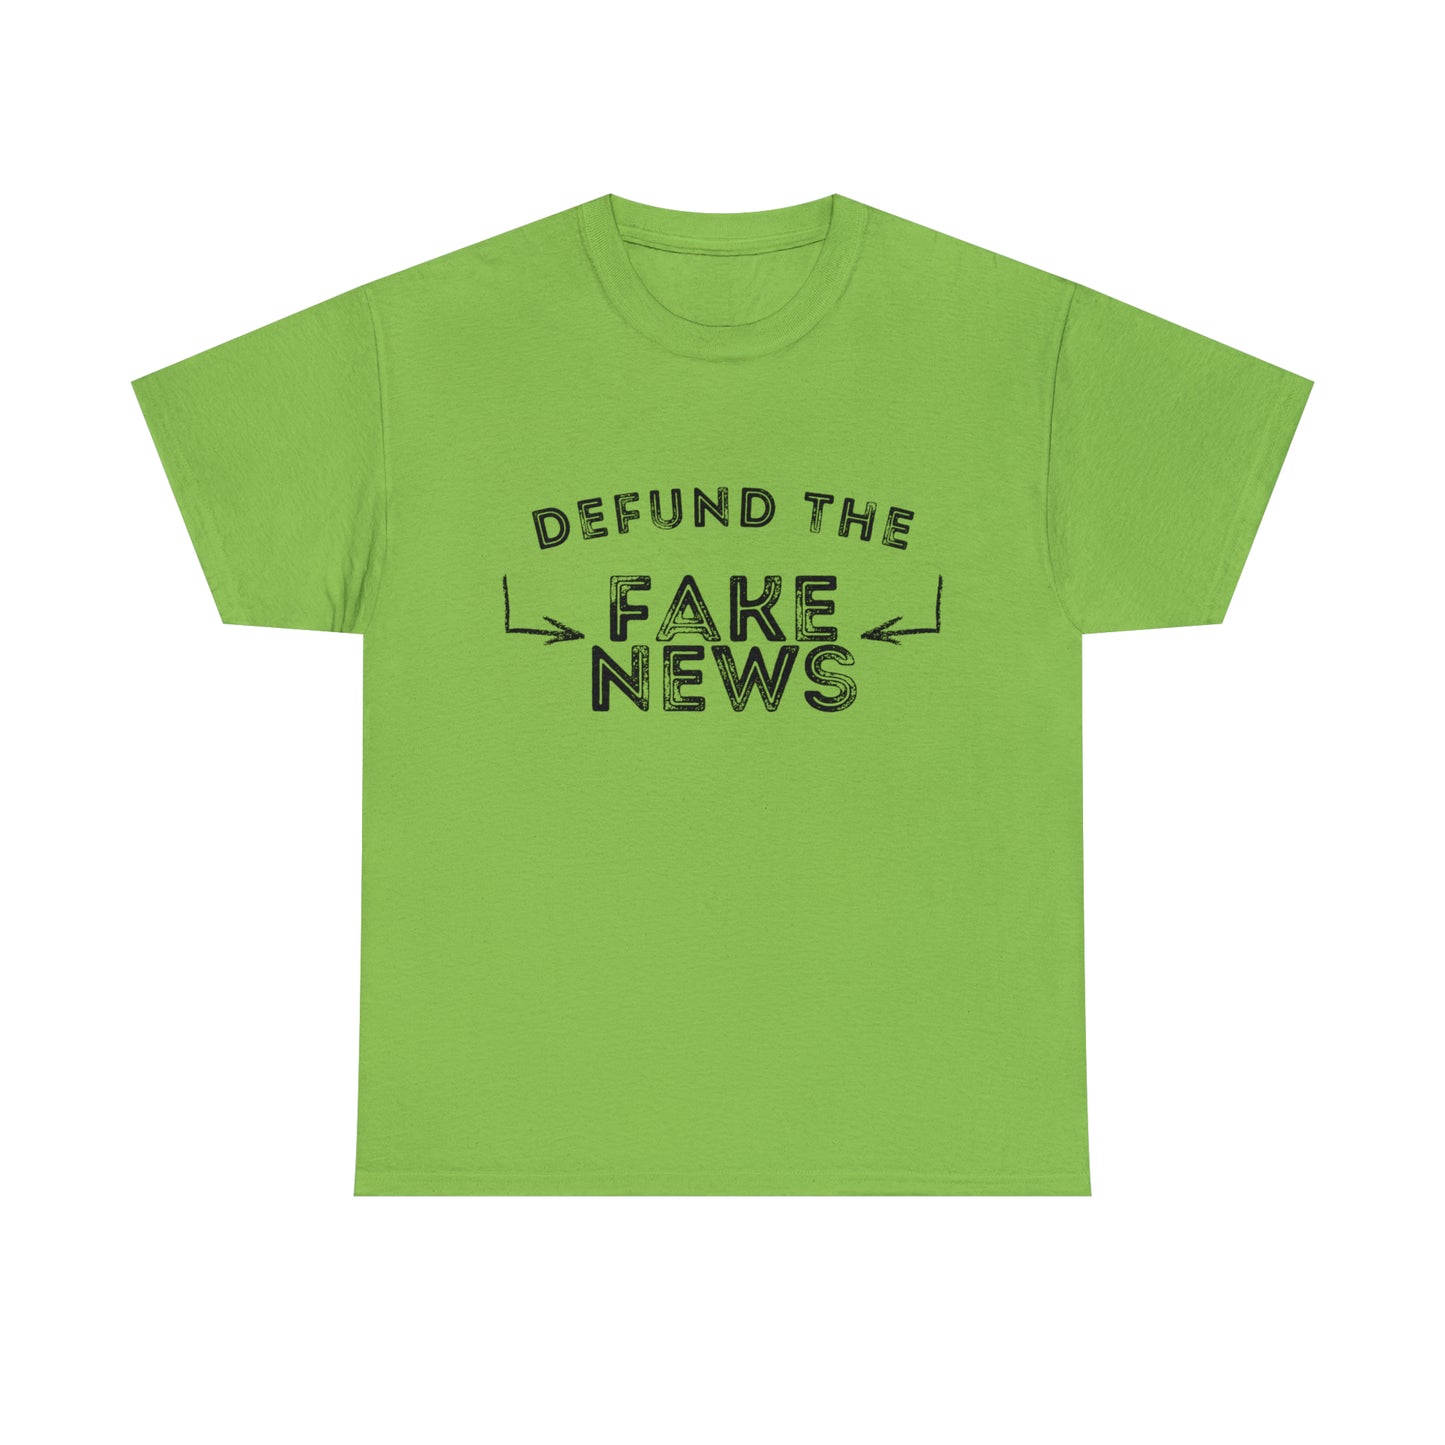 "Political commentary tee with 'Defund the Fake News' message"